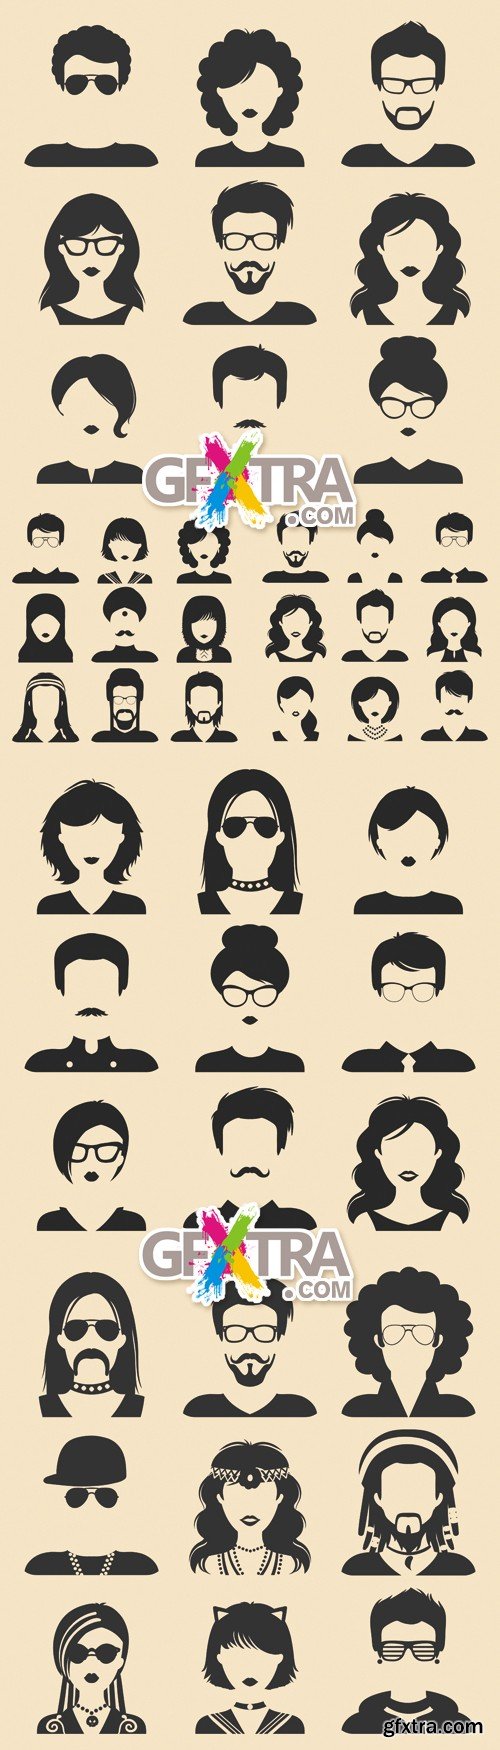 Male & Female Faces Icons Vector